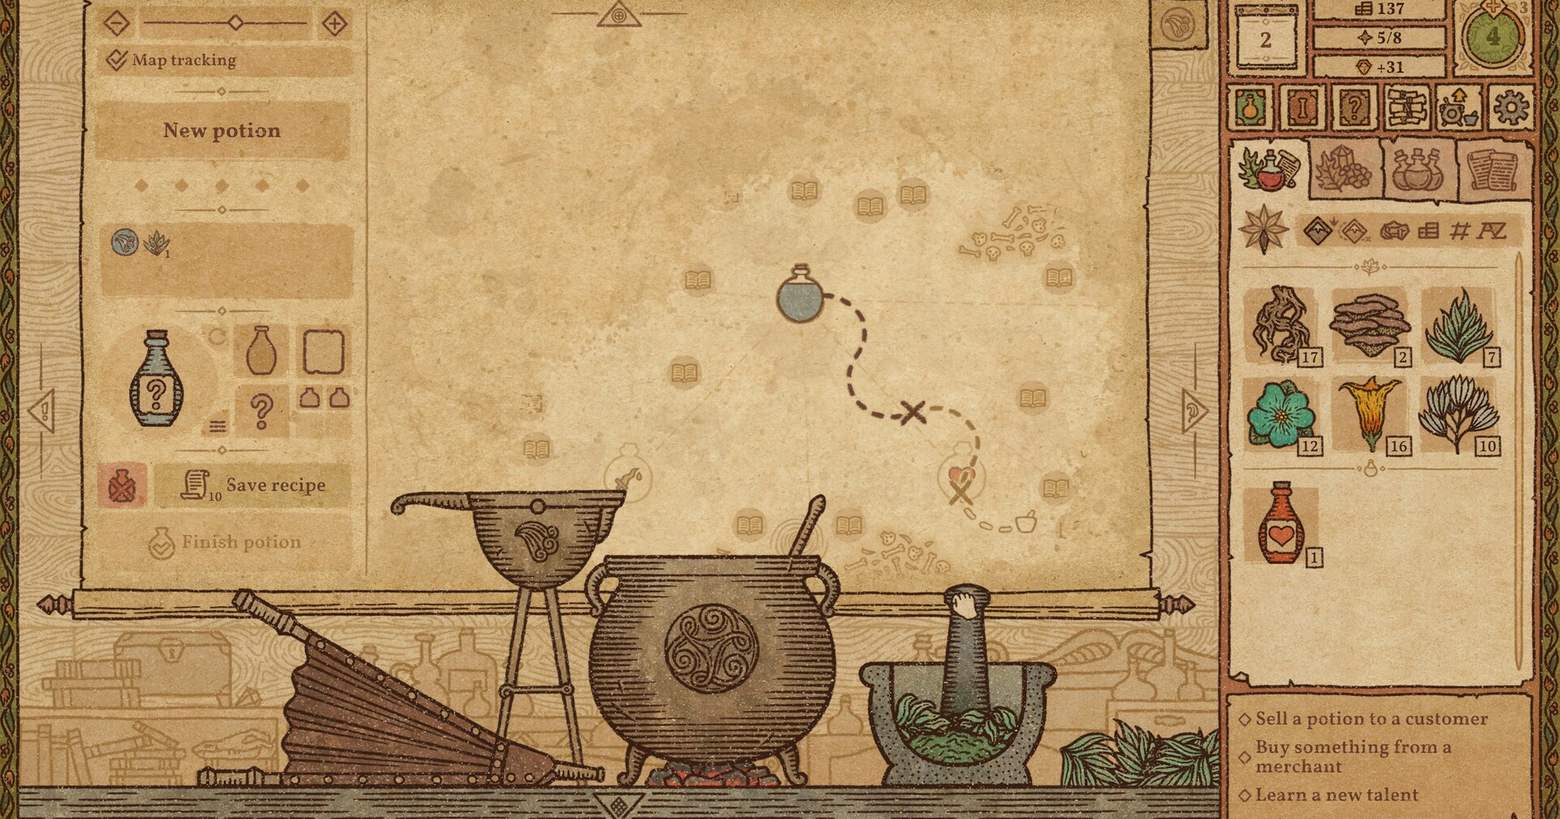 In Potion Craft: Alchemist Simulator you can brew extensive potions, as seen here in this screenshot: In flat lovingly drawn 2D graphics we glimpse a brewing chamber in profile, in which you can brew your potions. At the bottom center of the image is the large cauldron. To the right is a large mortar with a pestle, in which a green herb is being crushed. To the left of the cauldron is an ancient water spout, which rises above the cauldron on a stand. To the left of it, a blow bar for fire control can be seen on the floor. Almost the entire frame is filled by a rolled-up map hanging from the ceiling, visually representing the manufacturing process and also the type of potion. In the center of the map, we see the original potion, which then takes a certain path through the brewing process and becomes a specific one. On the left is a column with information about the current potion and on the right we see an inventory showing several different ingredients such as herbs. The scene appears in a brown tone.